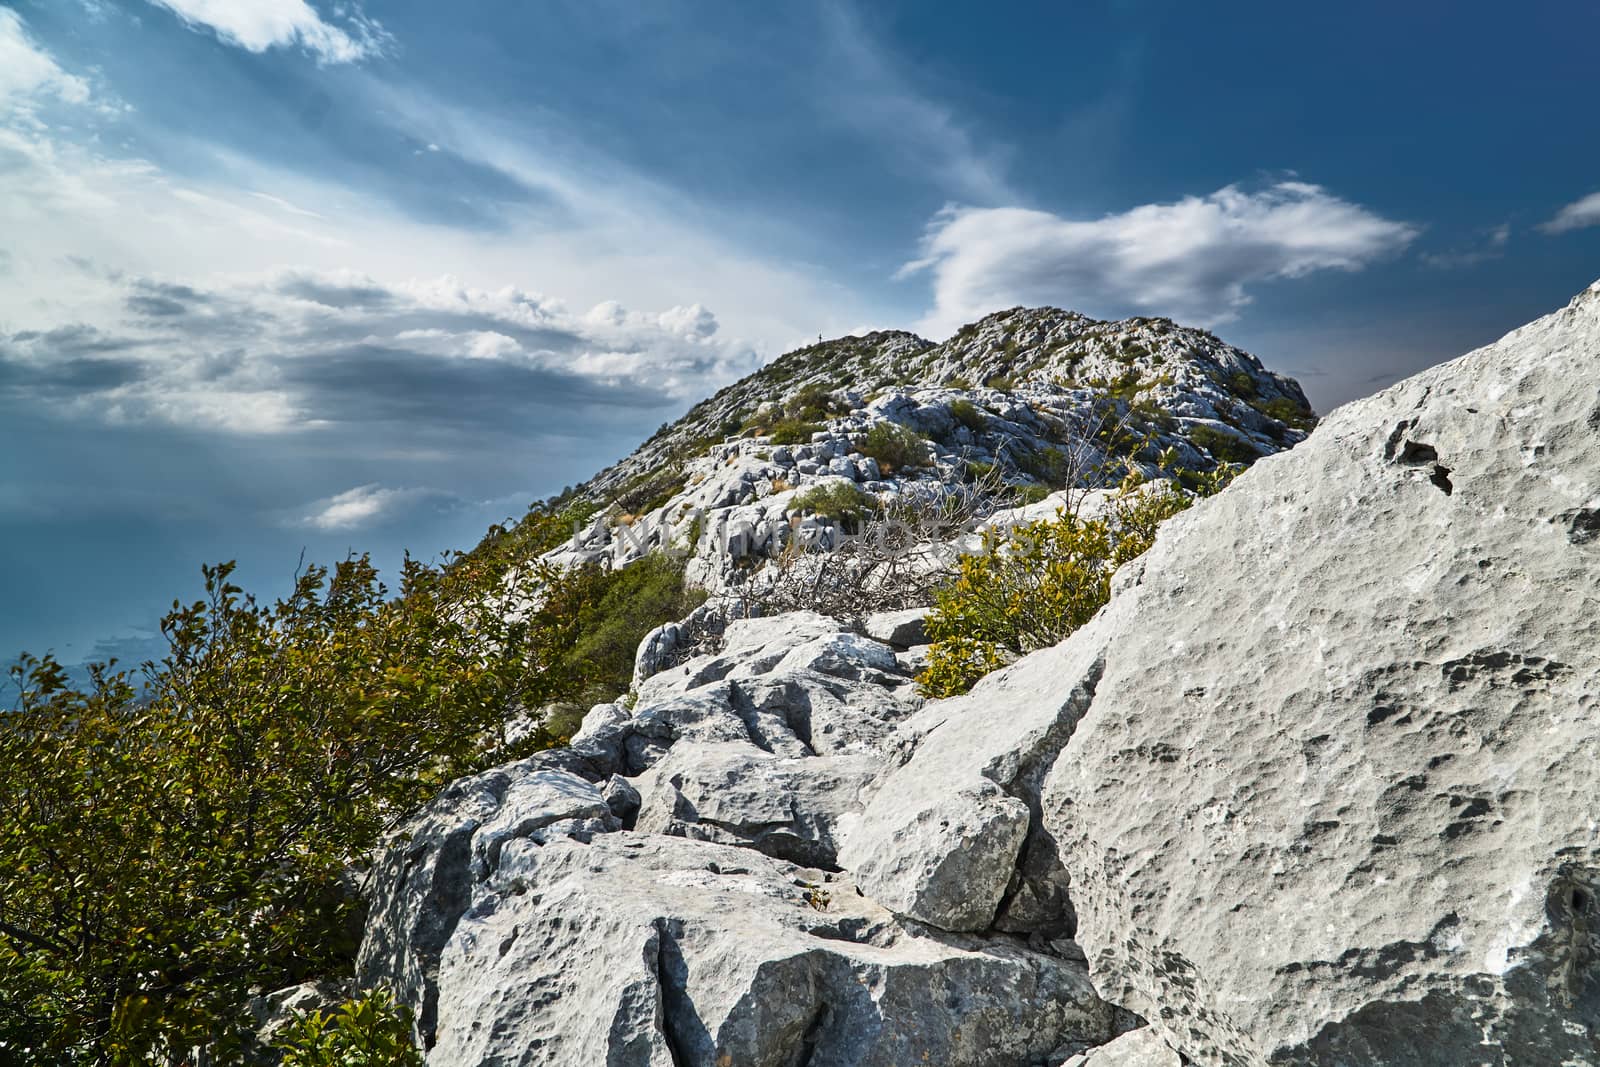 Rocks and peaks in the Mosor massif in the Dinaric mountains in Croatia